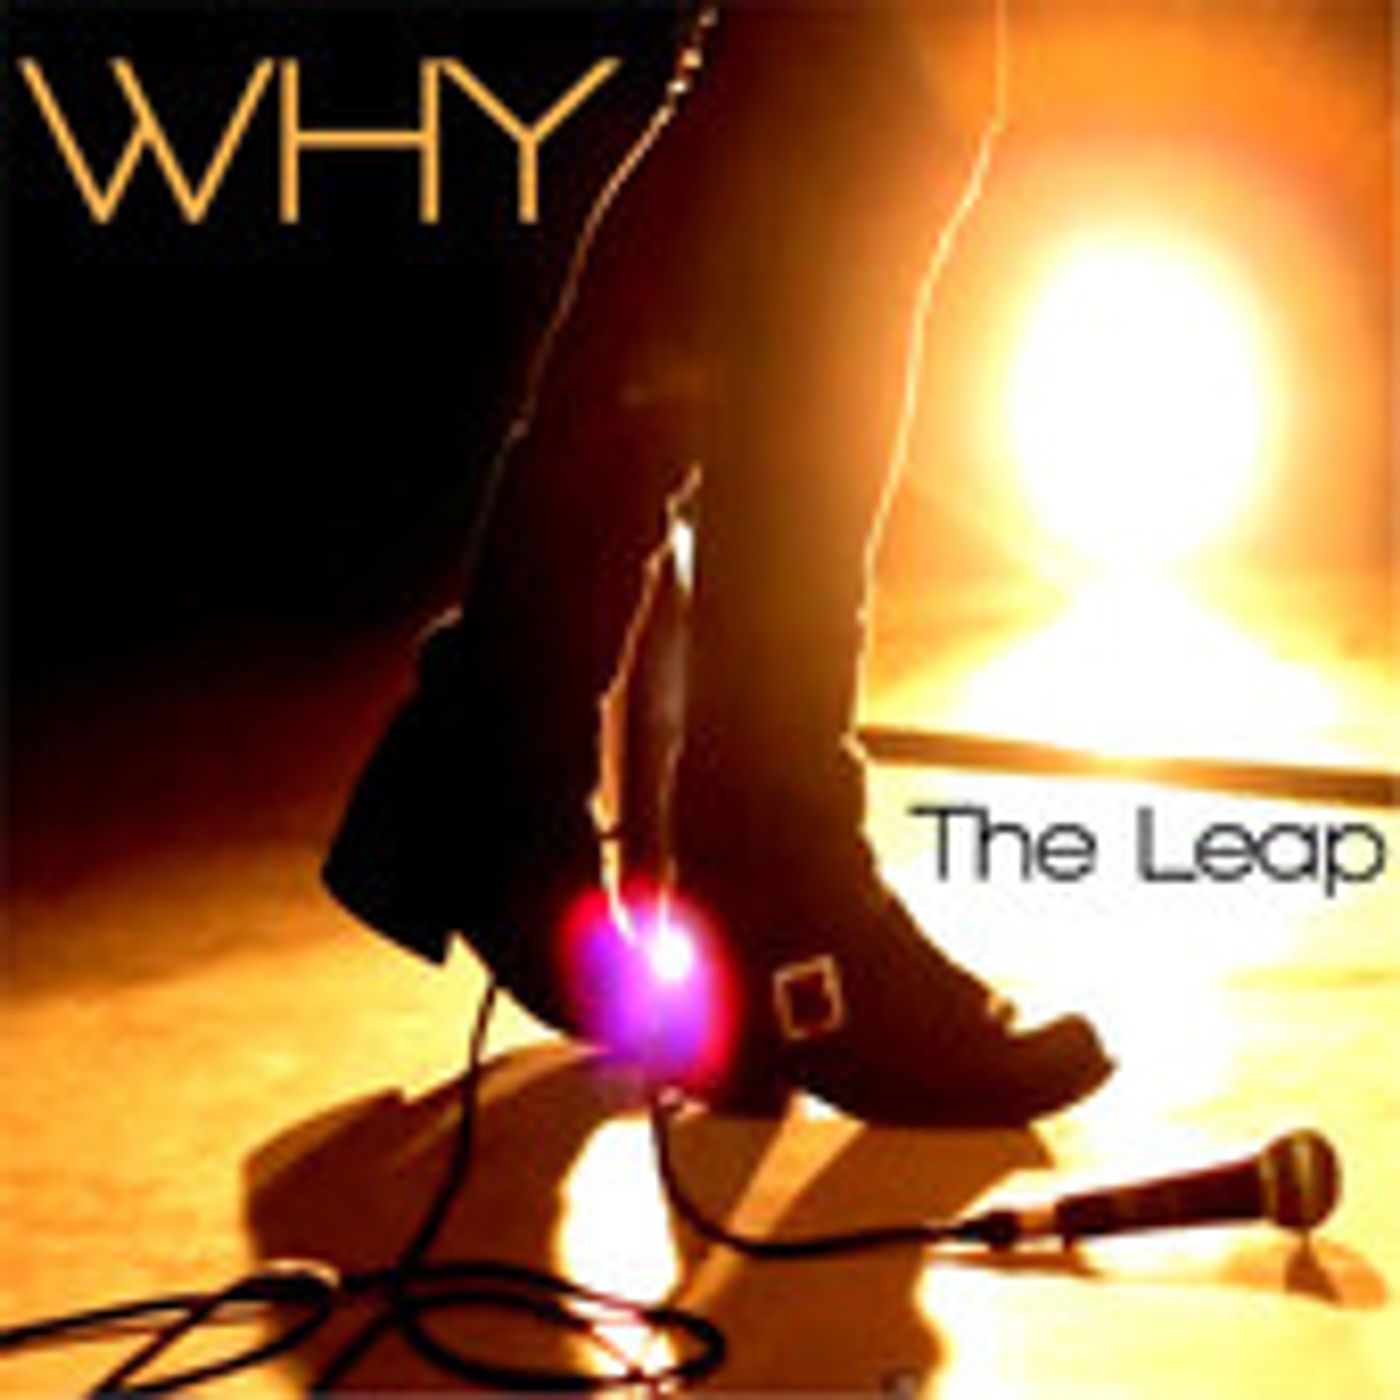 The Leap by WHY